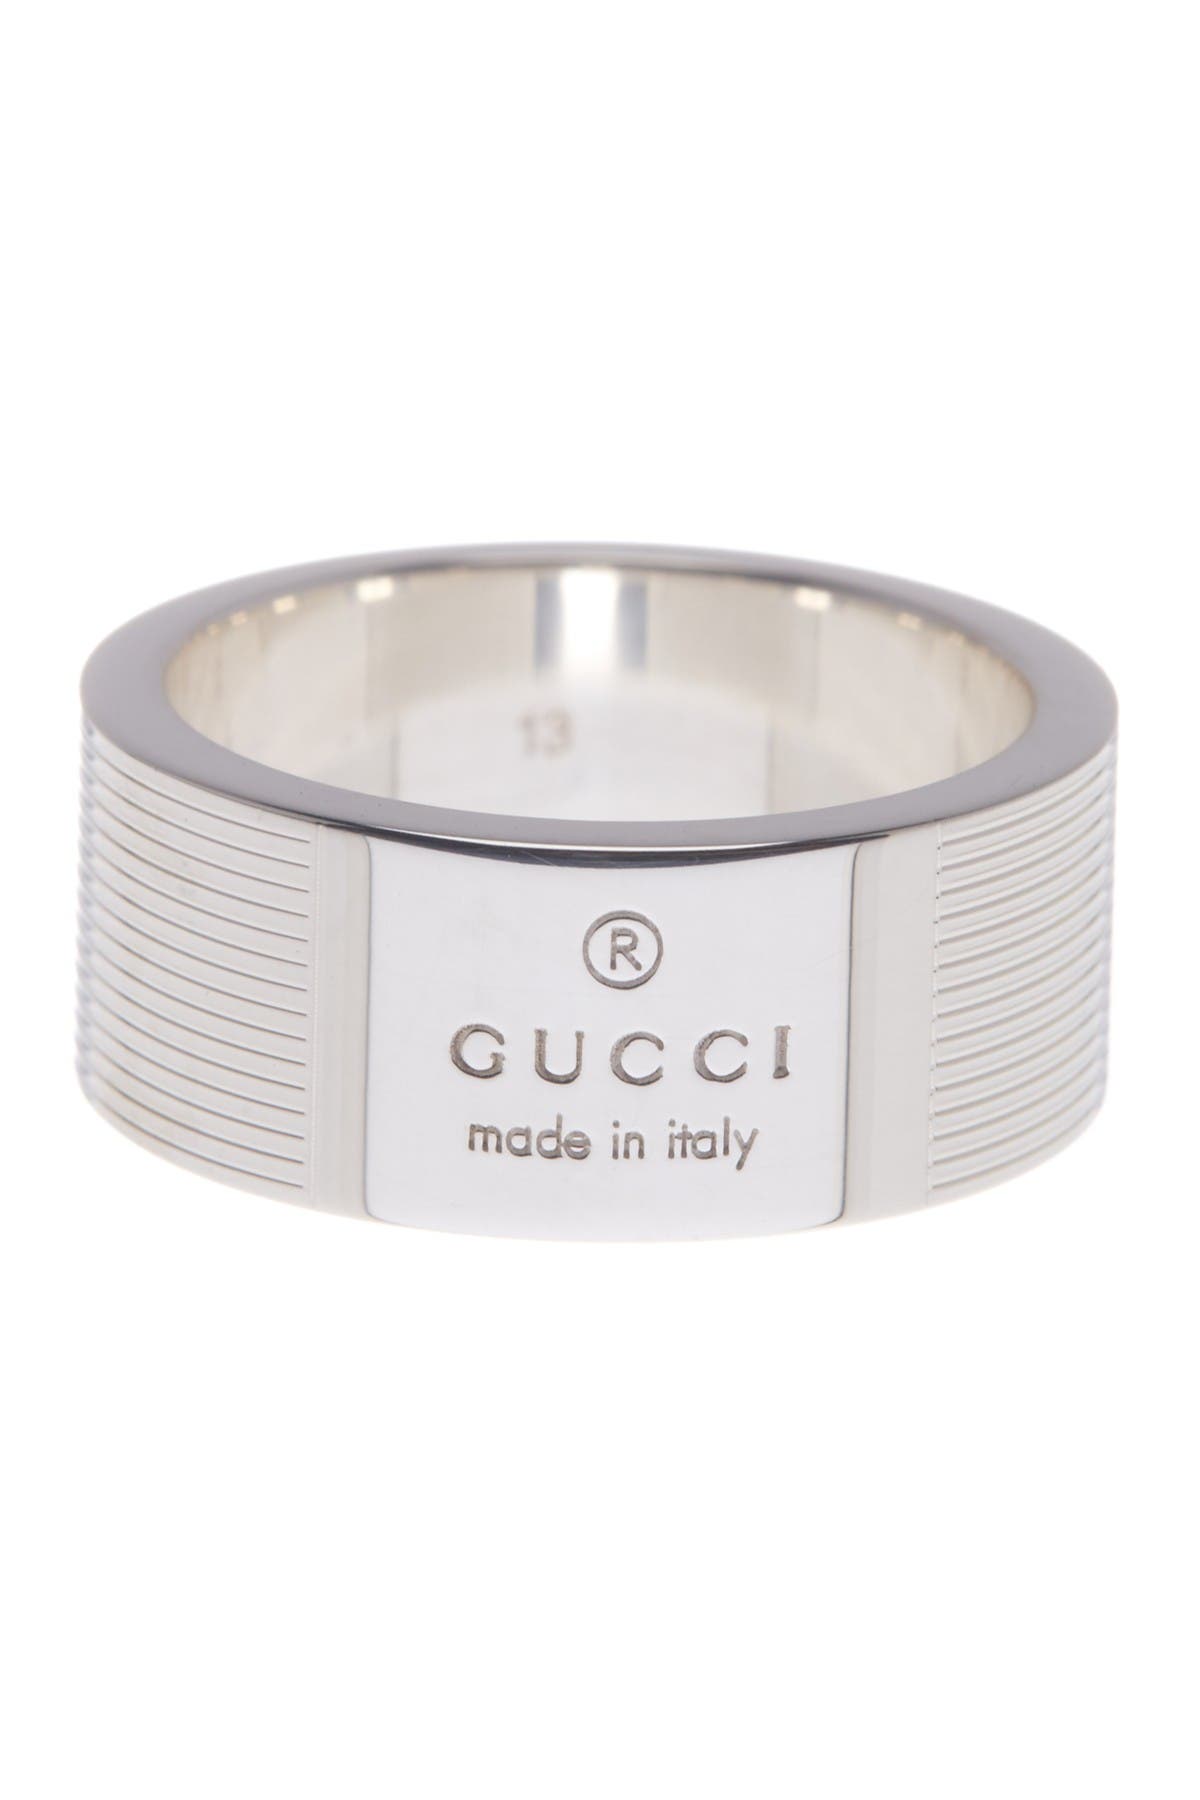 gucci ring nordstrom rack